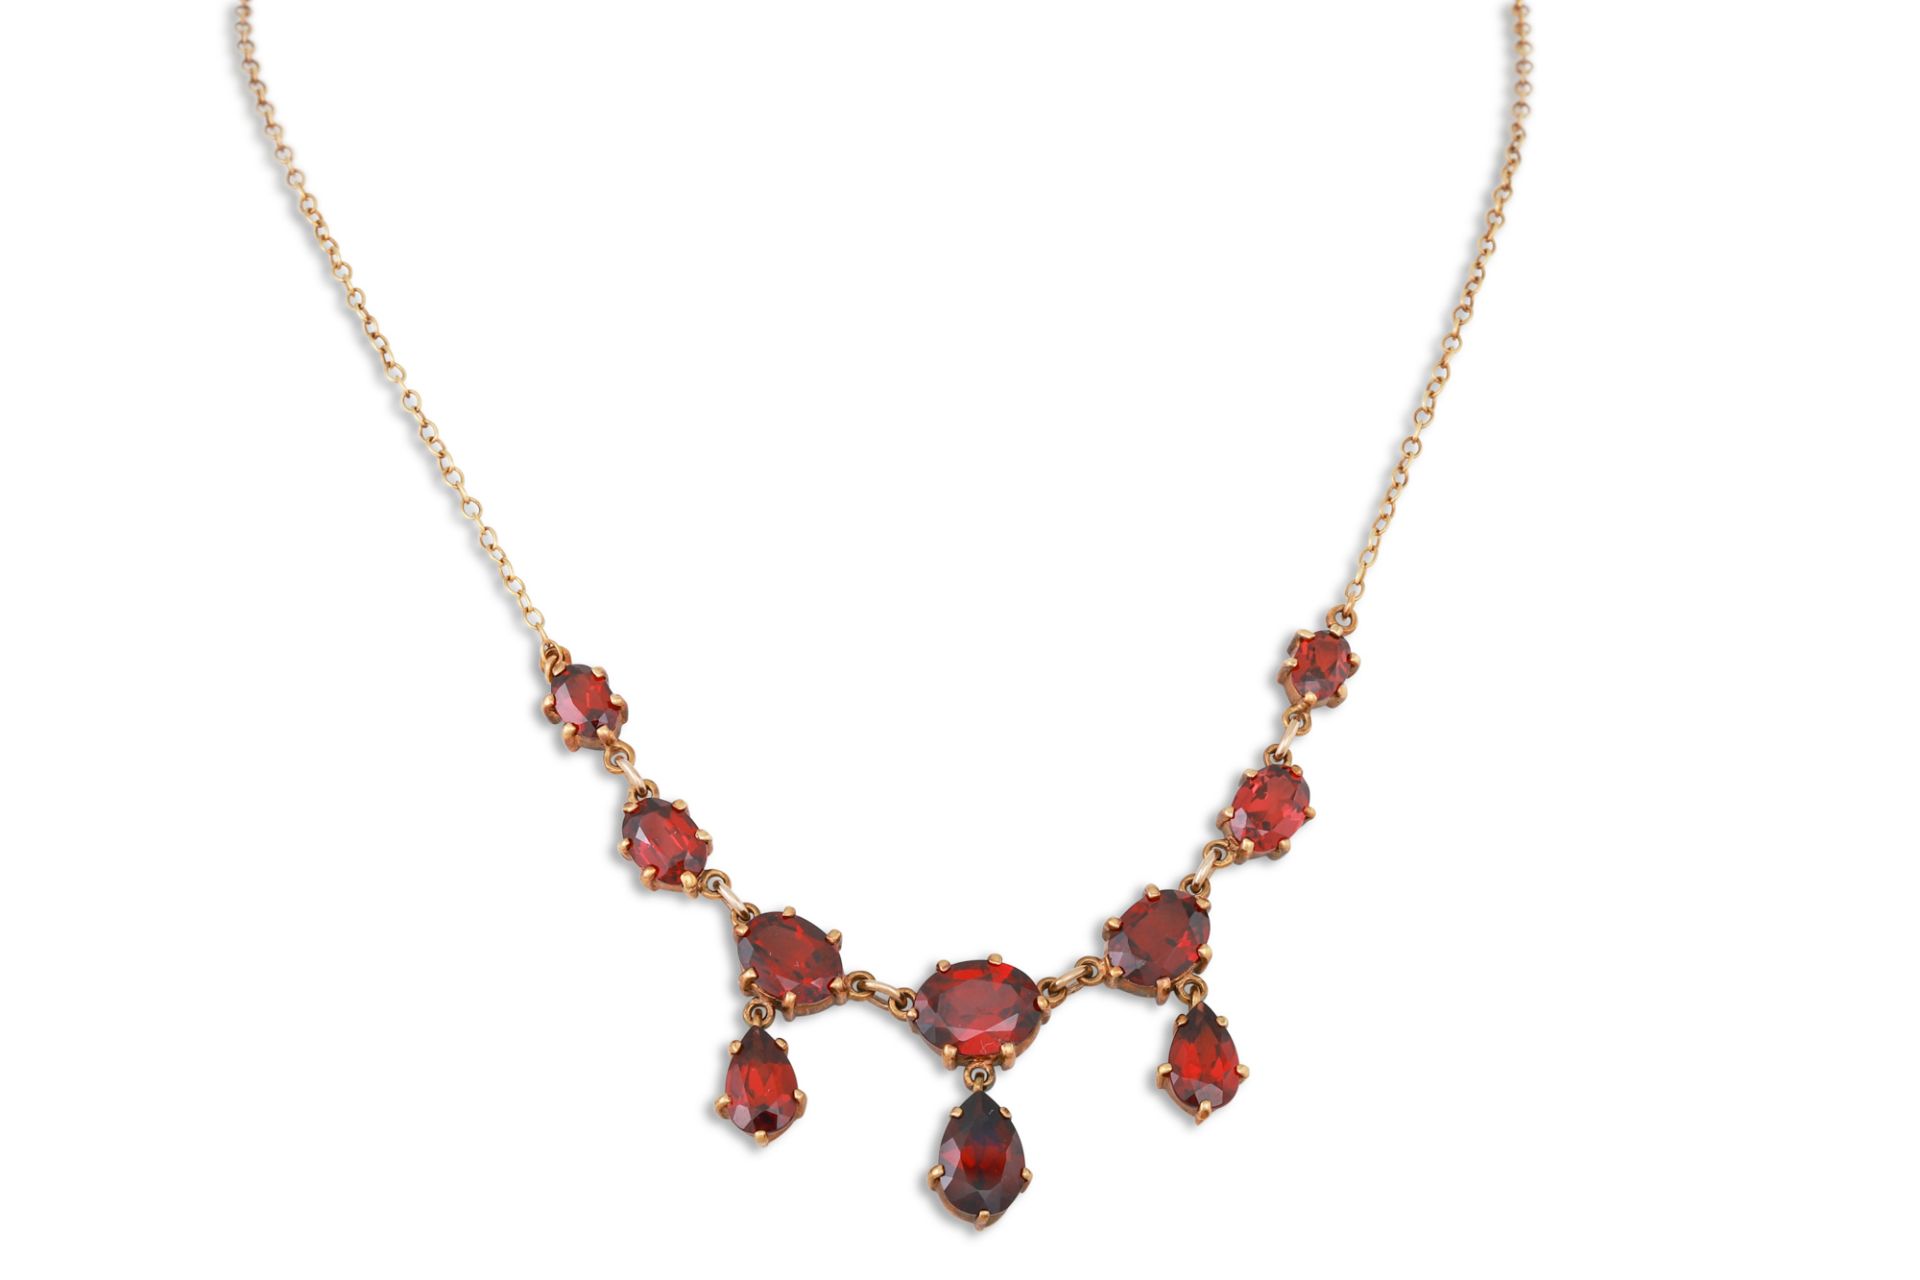 AN ANTIQUE GARNET NECKLACE, the pear, and oval garnets suspended from a yellow gold chain, mounted